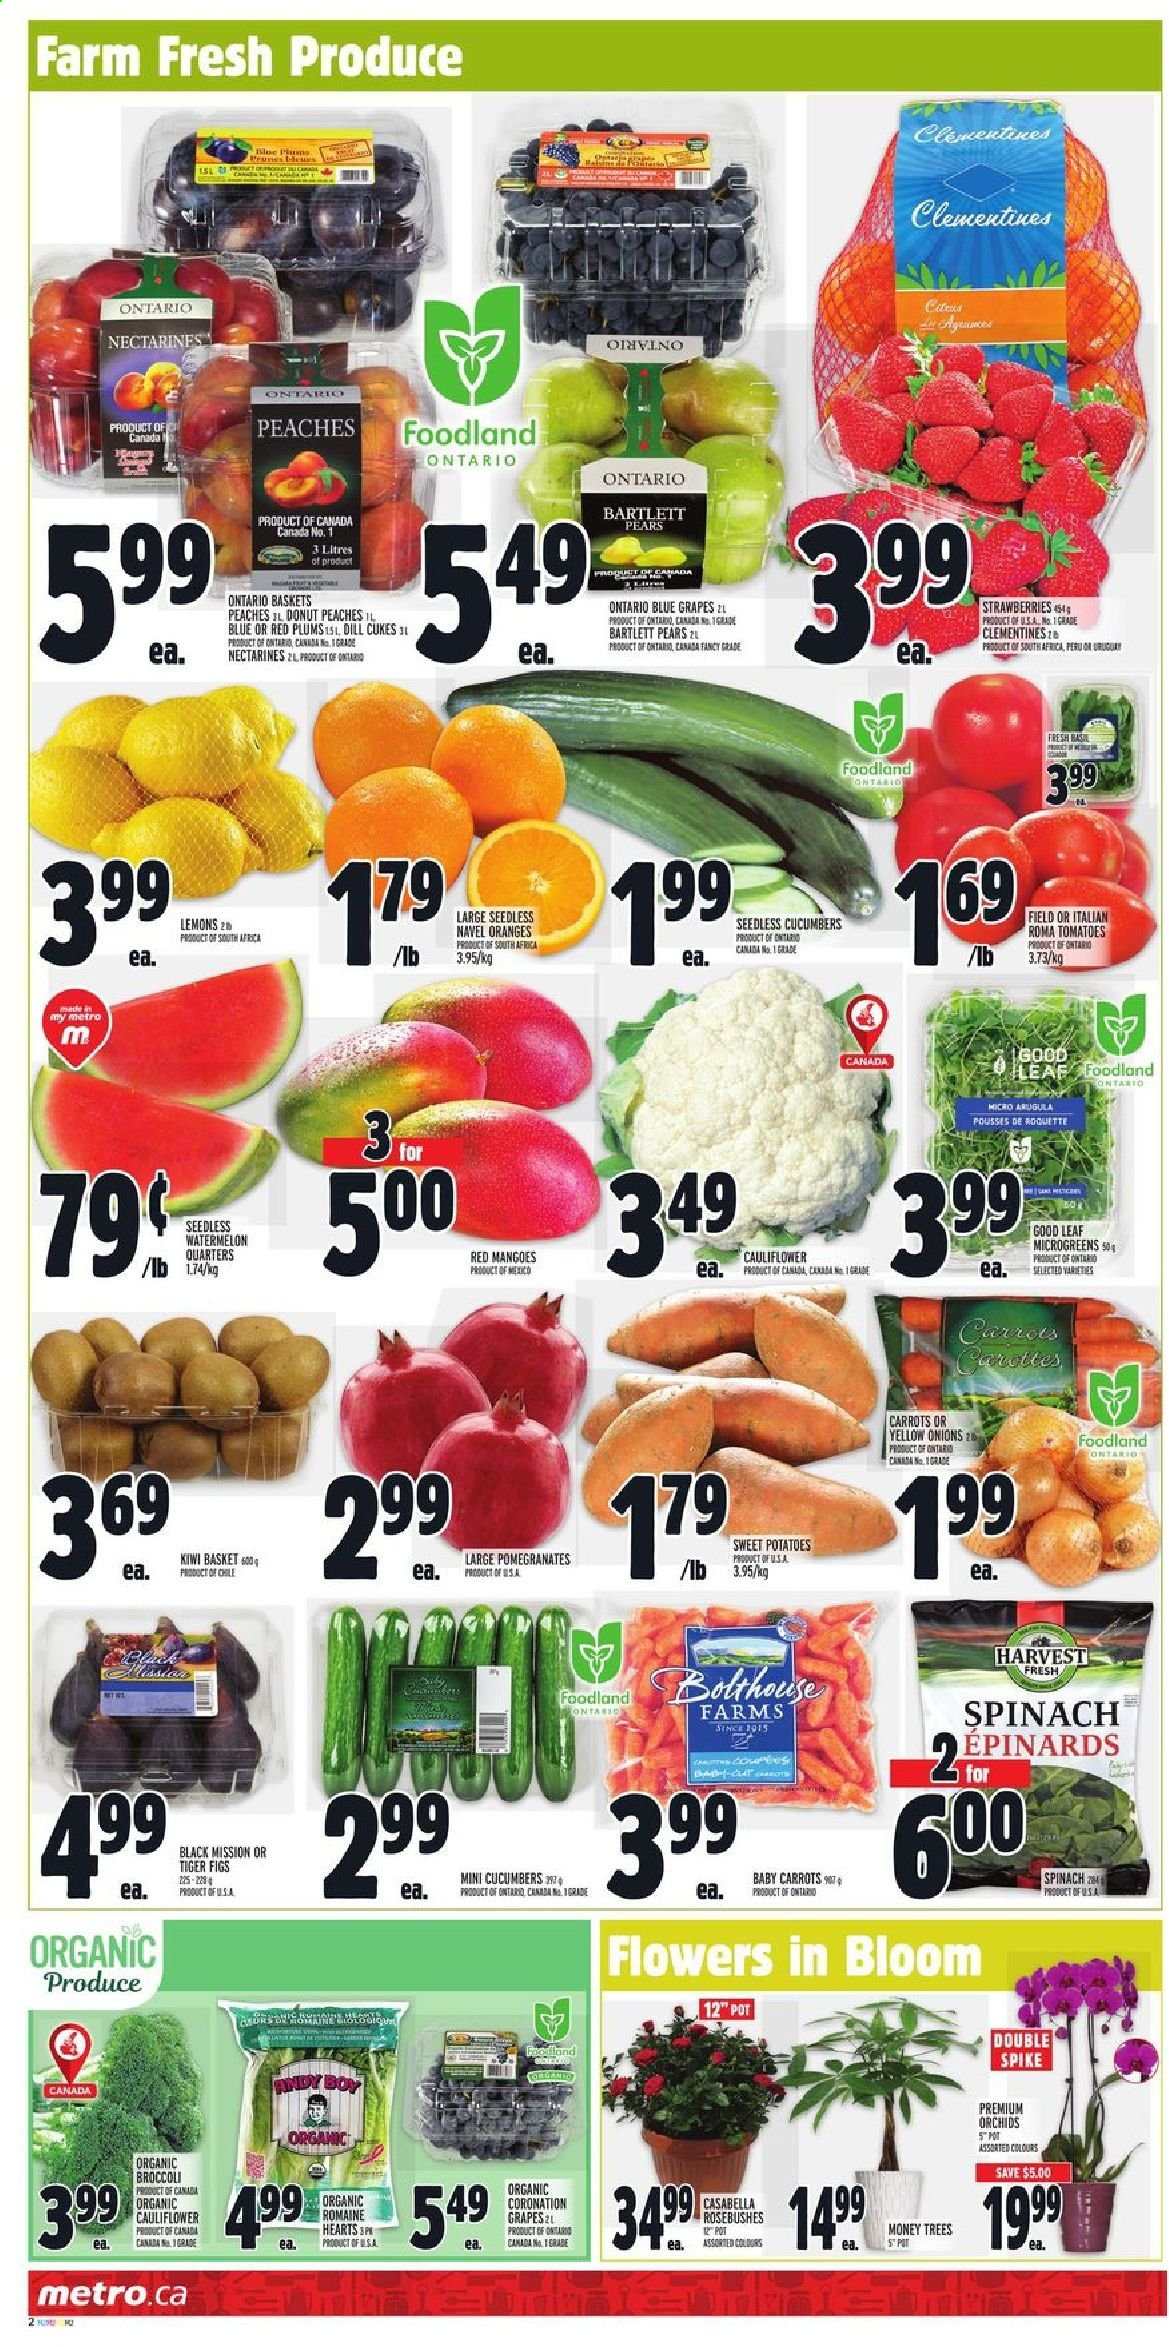 thumbnail - Metro Flyer - August 26, 2021 - September 01, 2021 - Sales products - donut, arugula, broccoli, carrots, cauliflower, cucumber, spinach, sweet potato, tomatoes, potatoes, onion, Bartlett pears, clementines, figs, grapes, nectarines, strawberries, watermelon, pears, pomegranate, lemons, peaches, navel oranges, esponja, dill, pot, basket, kiwi, oranges. Page 2.